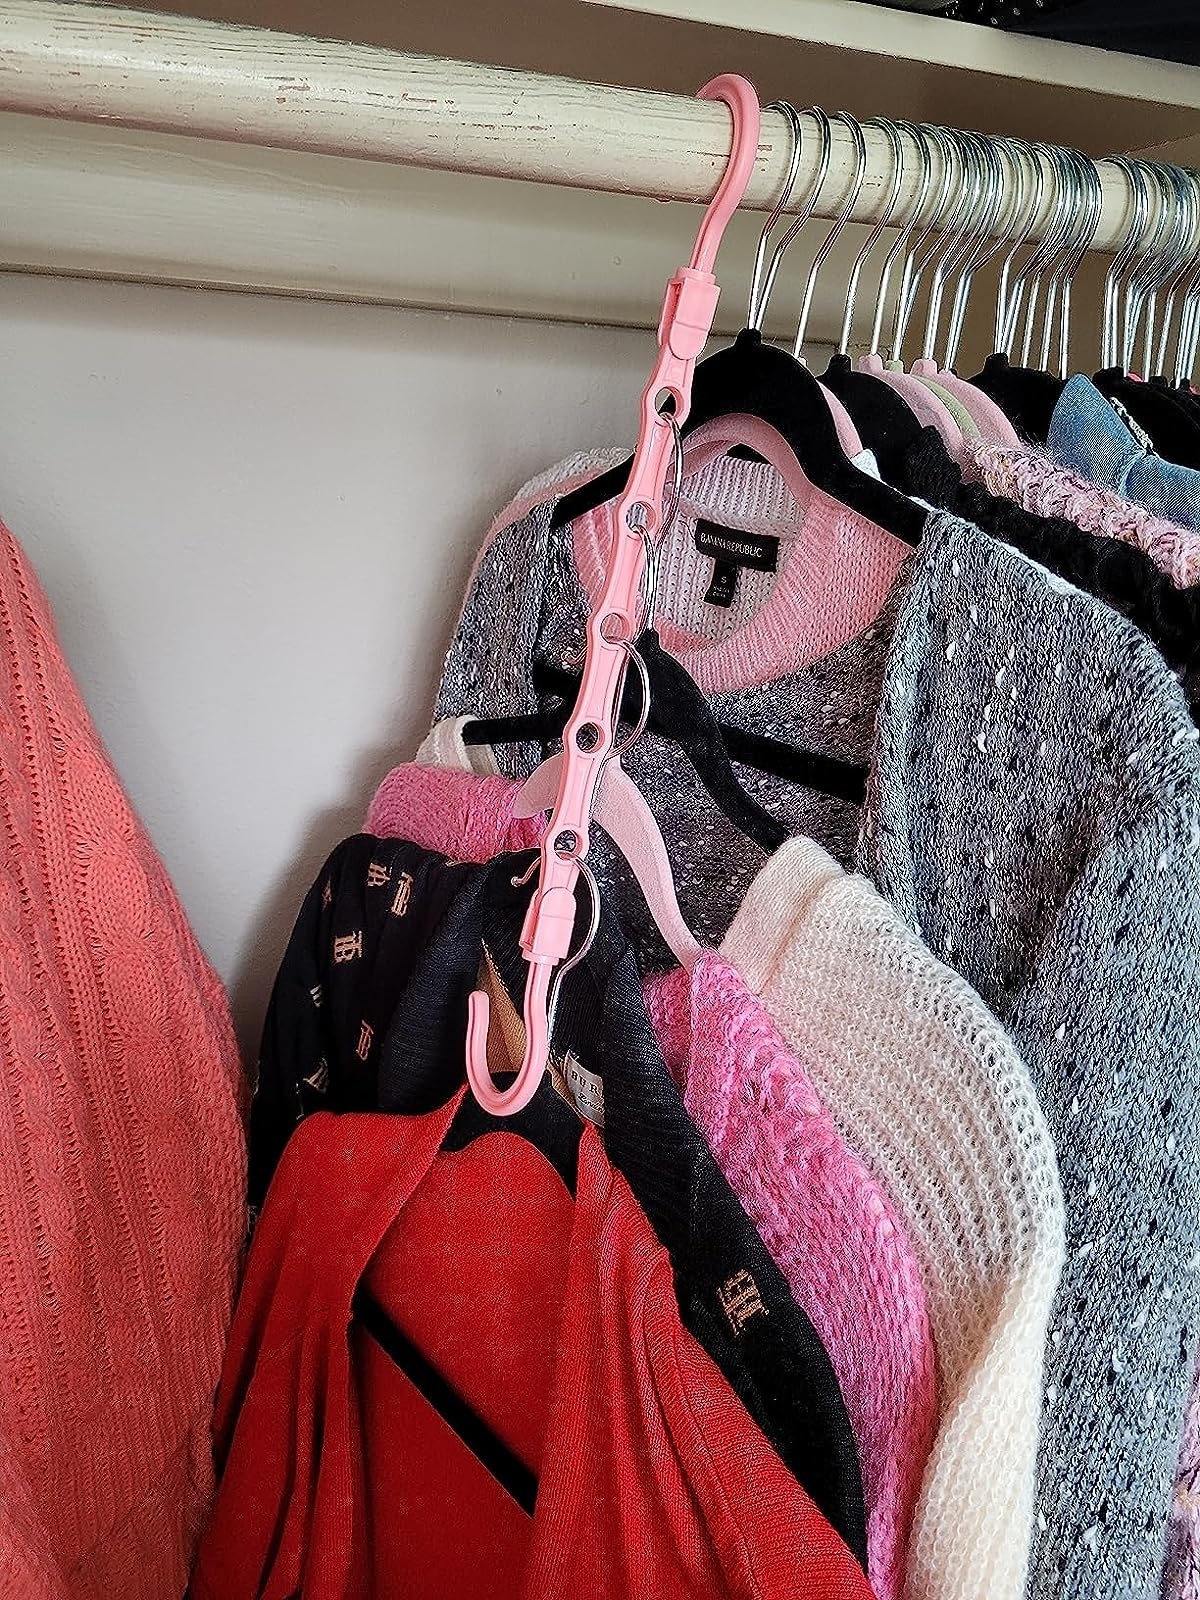 Reviewer image of the hanger used in their closet